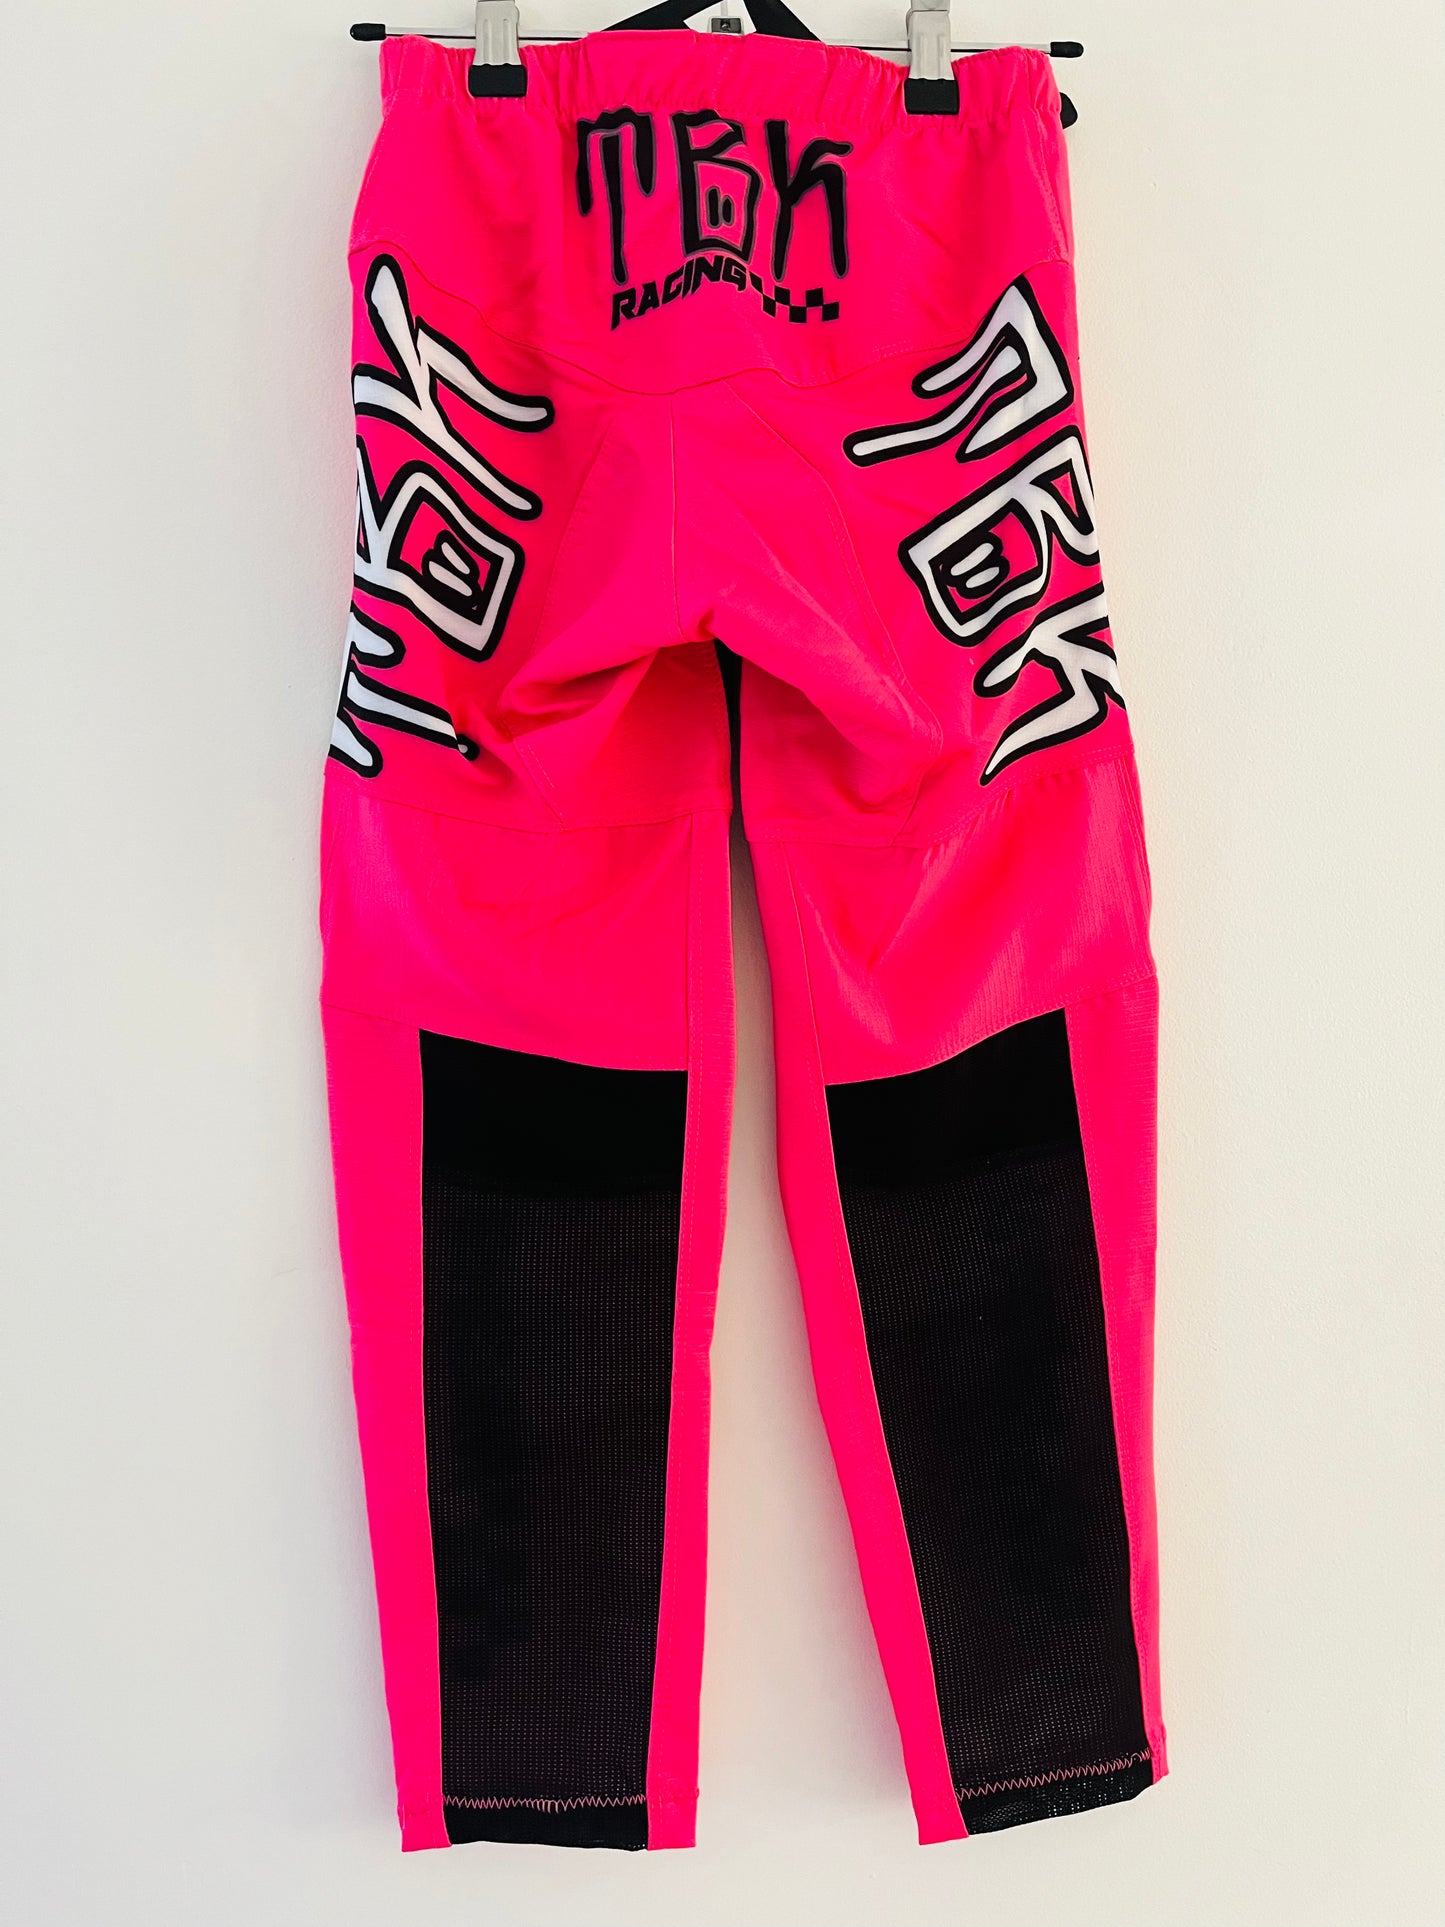 TBK Pink Sprocket Race Pants - Perfect Fit for Young Riders